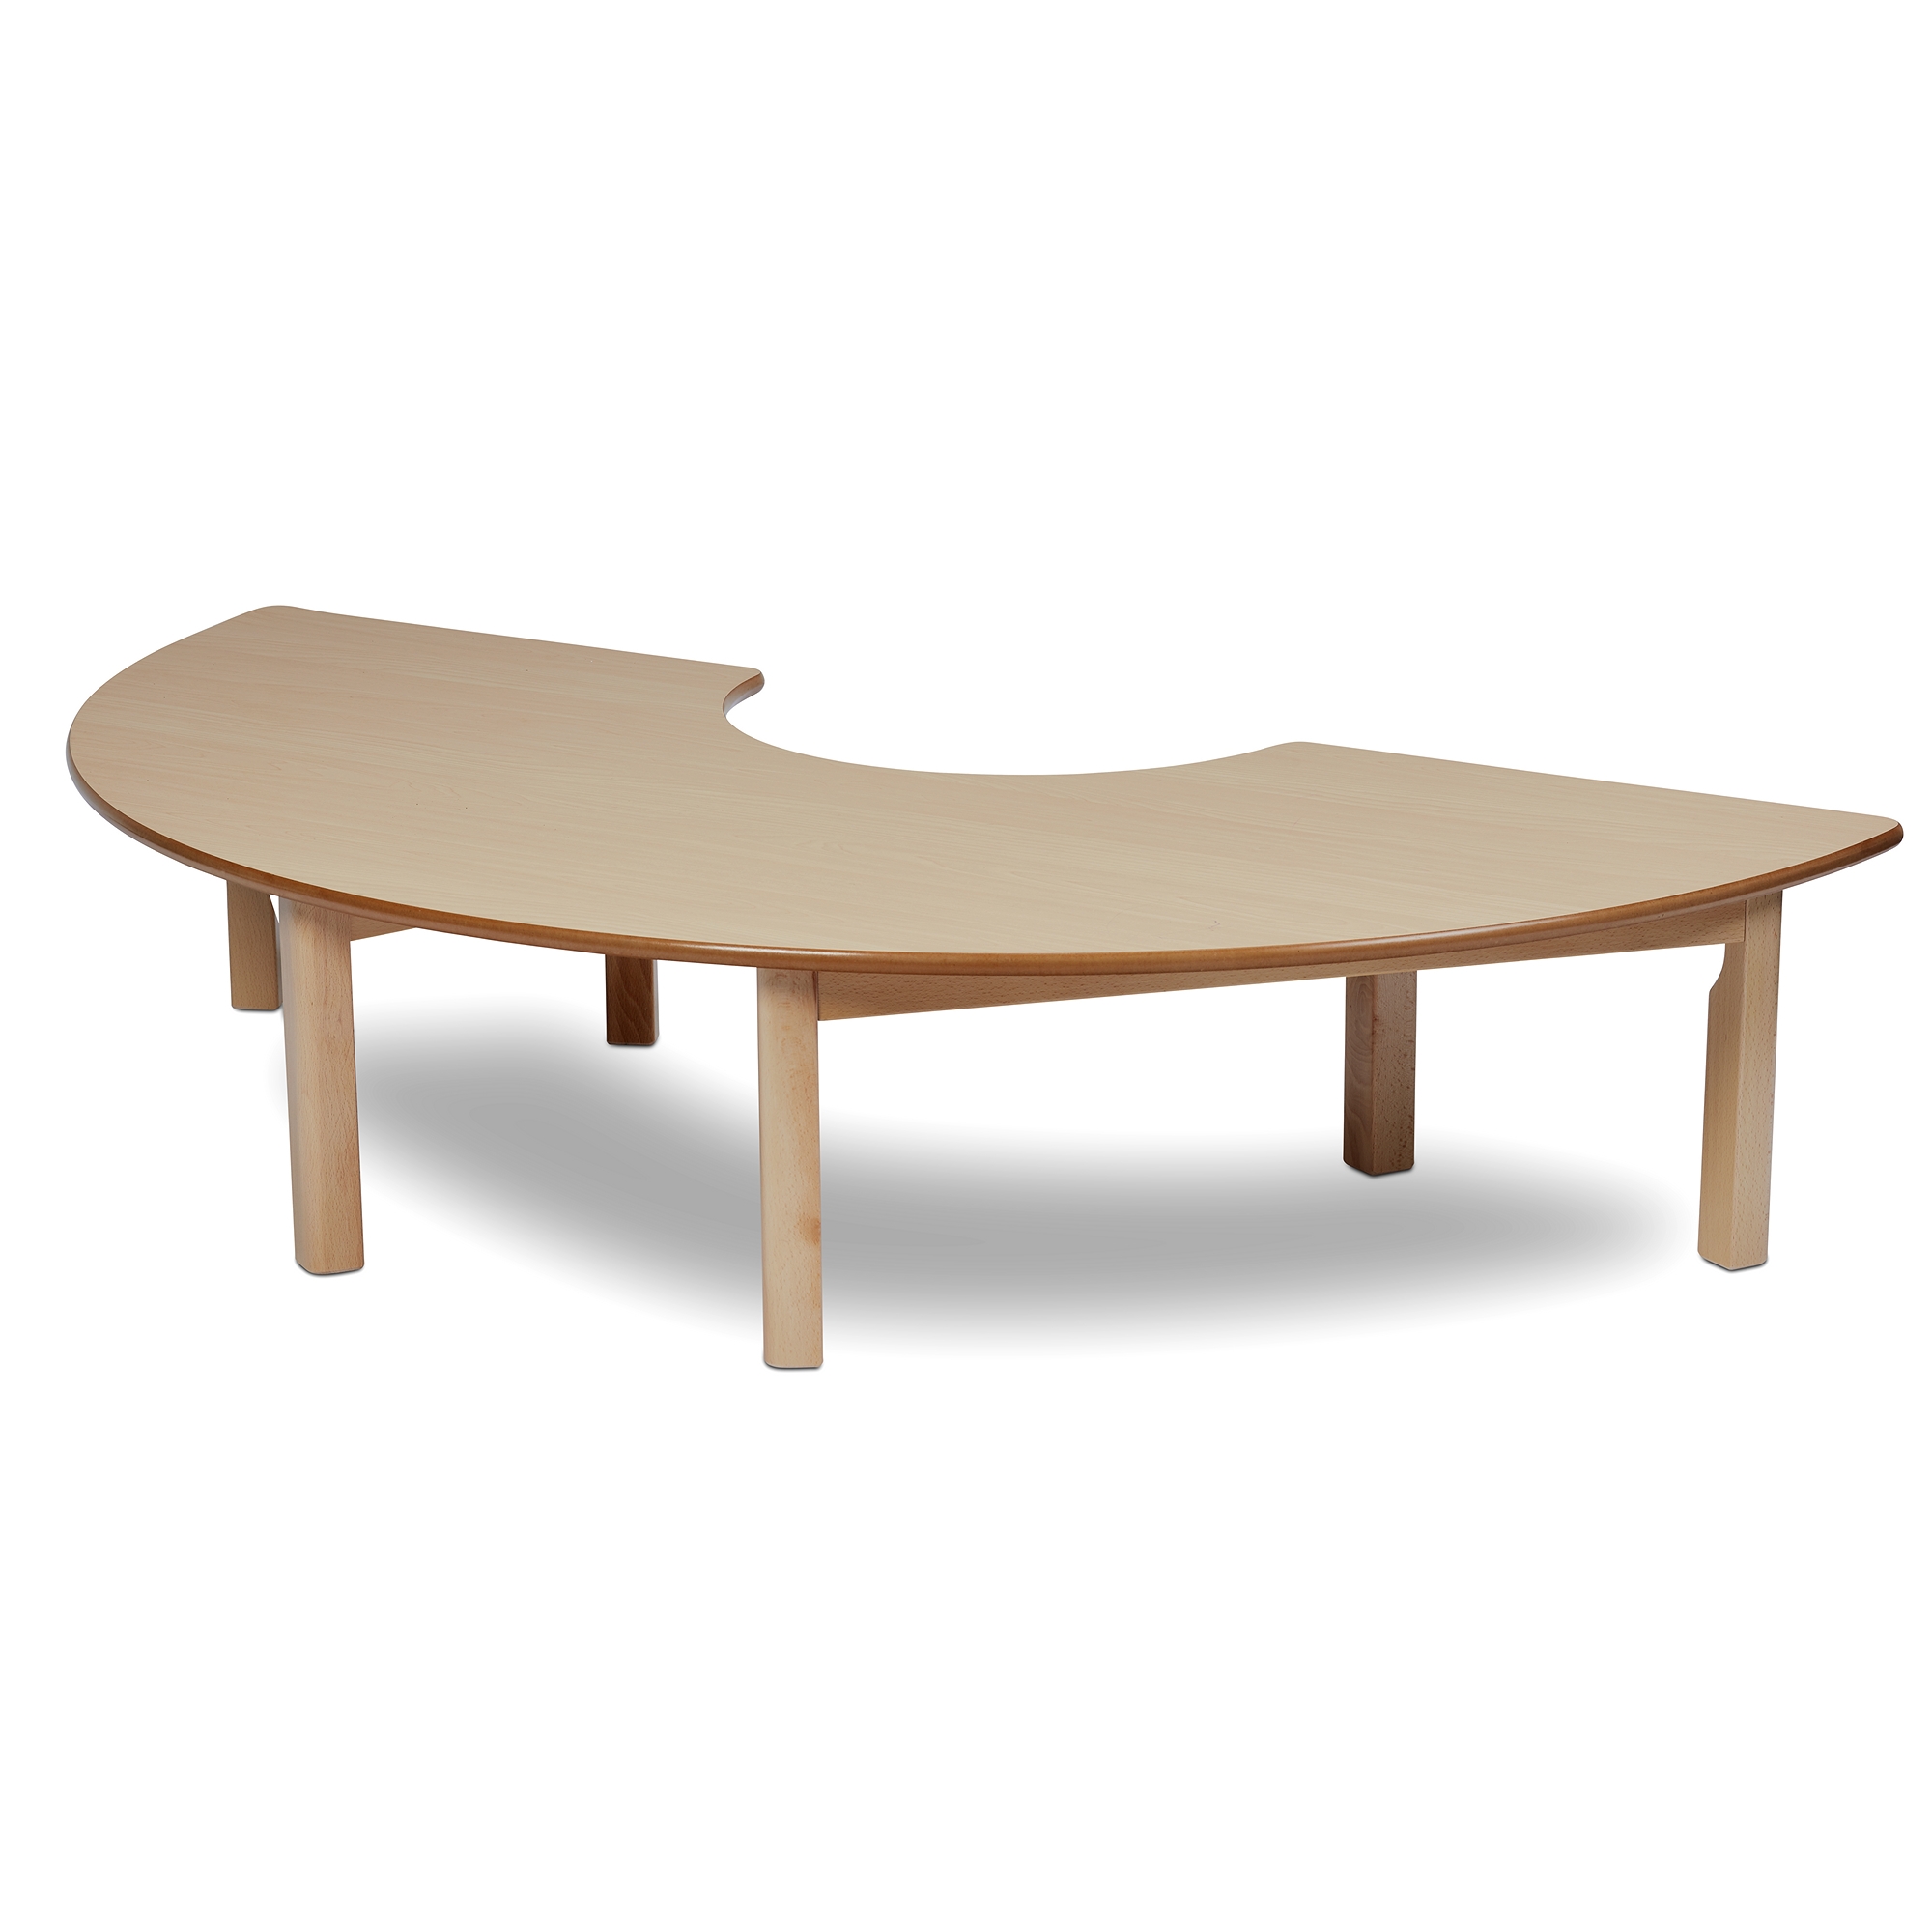 Playscapes Semi Circle Table - 460mm Height